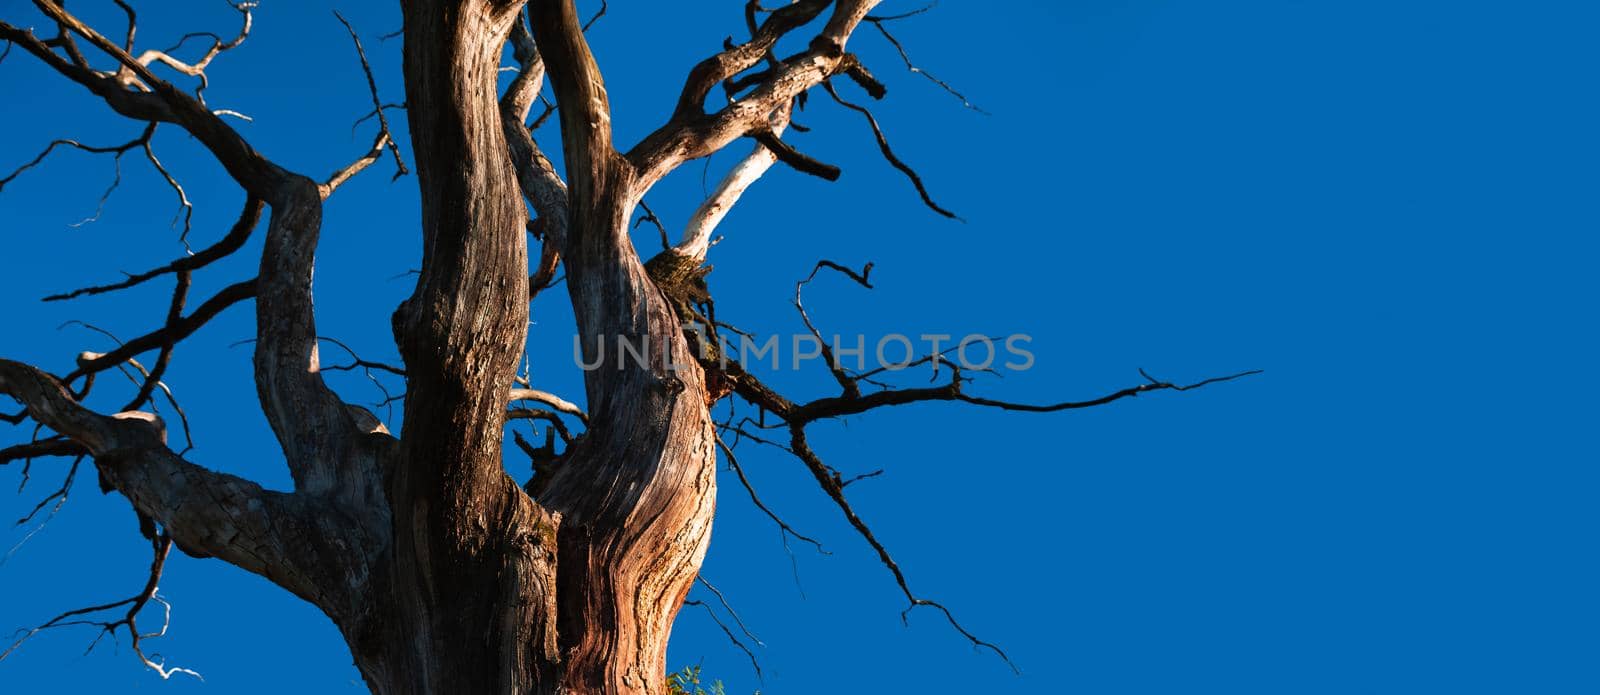 Dead branches of a tree. Old and completely dry tree against blue sky. Dead Tree without leaf.